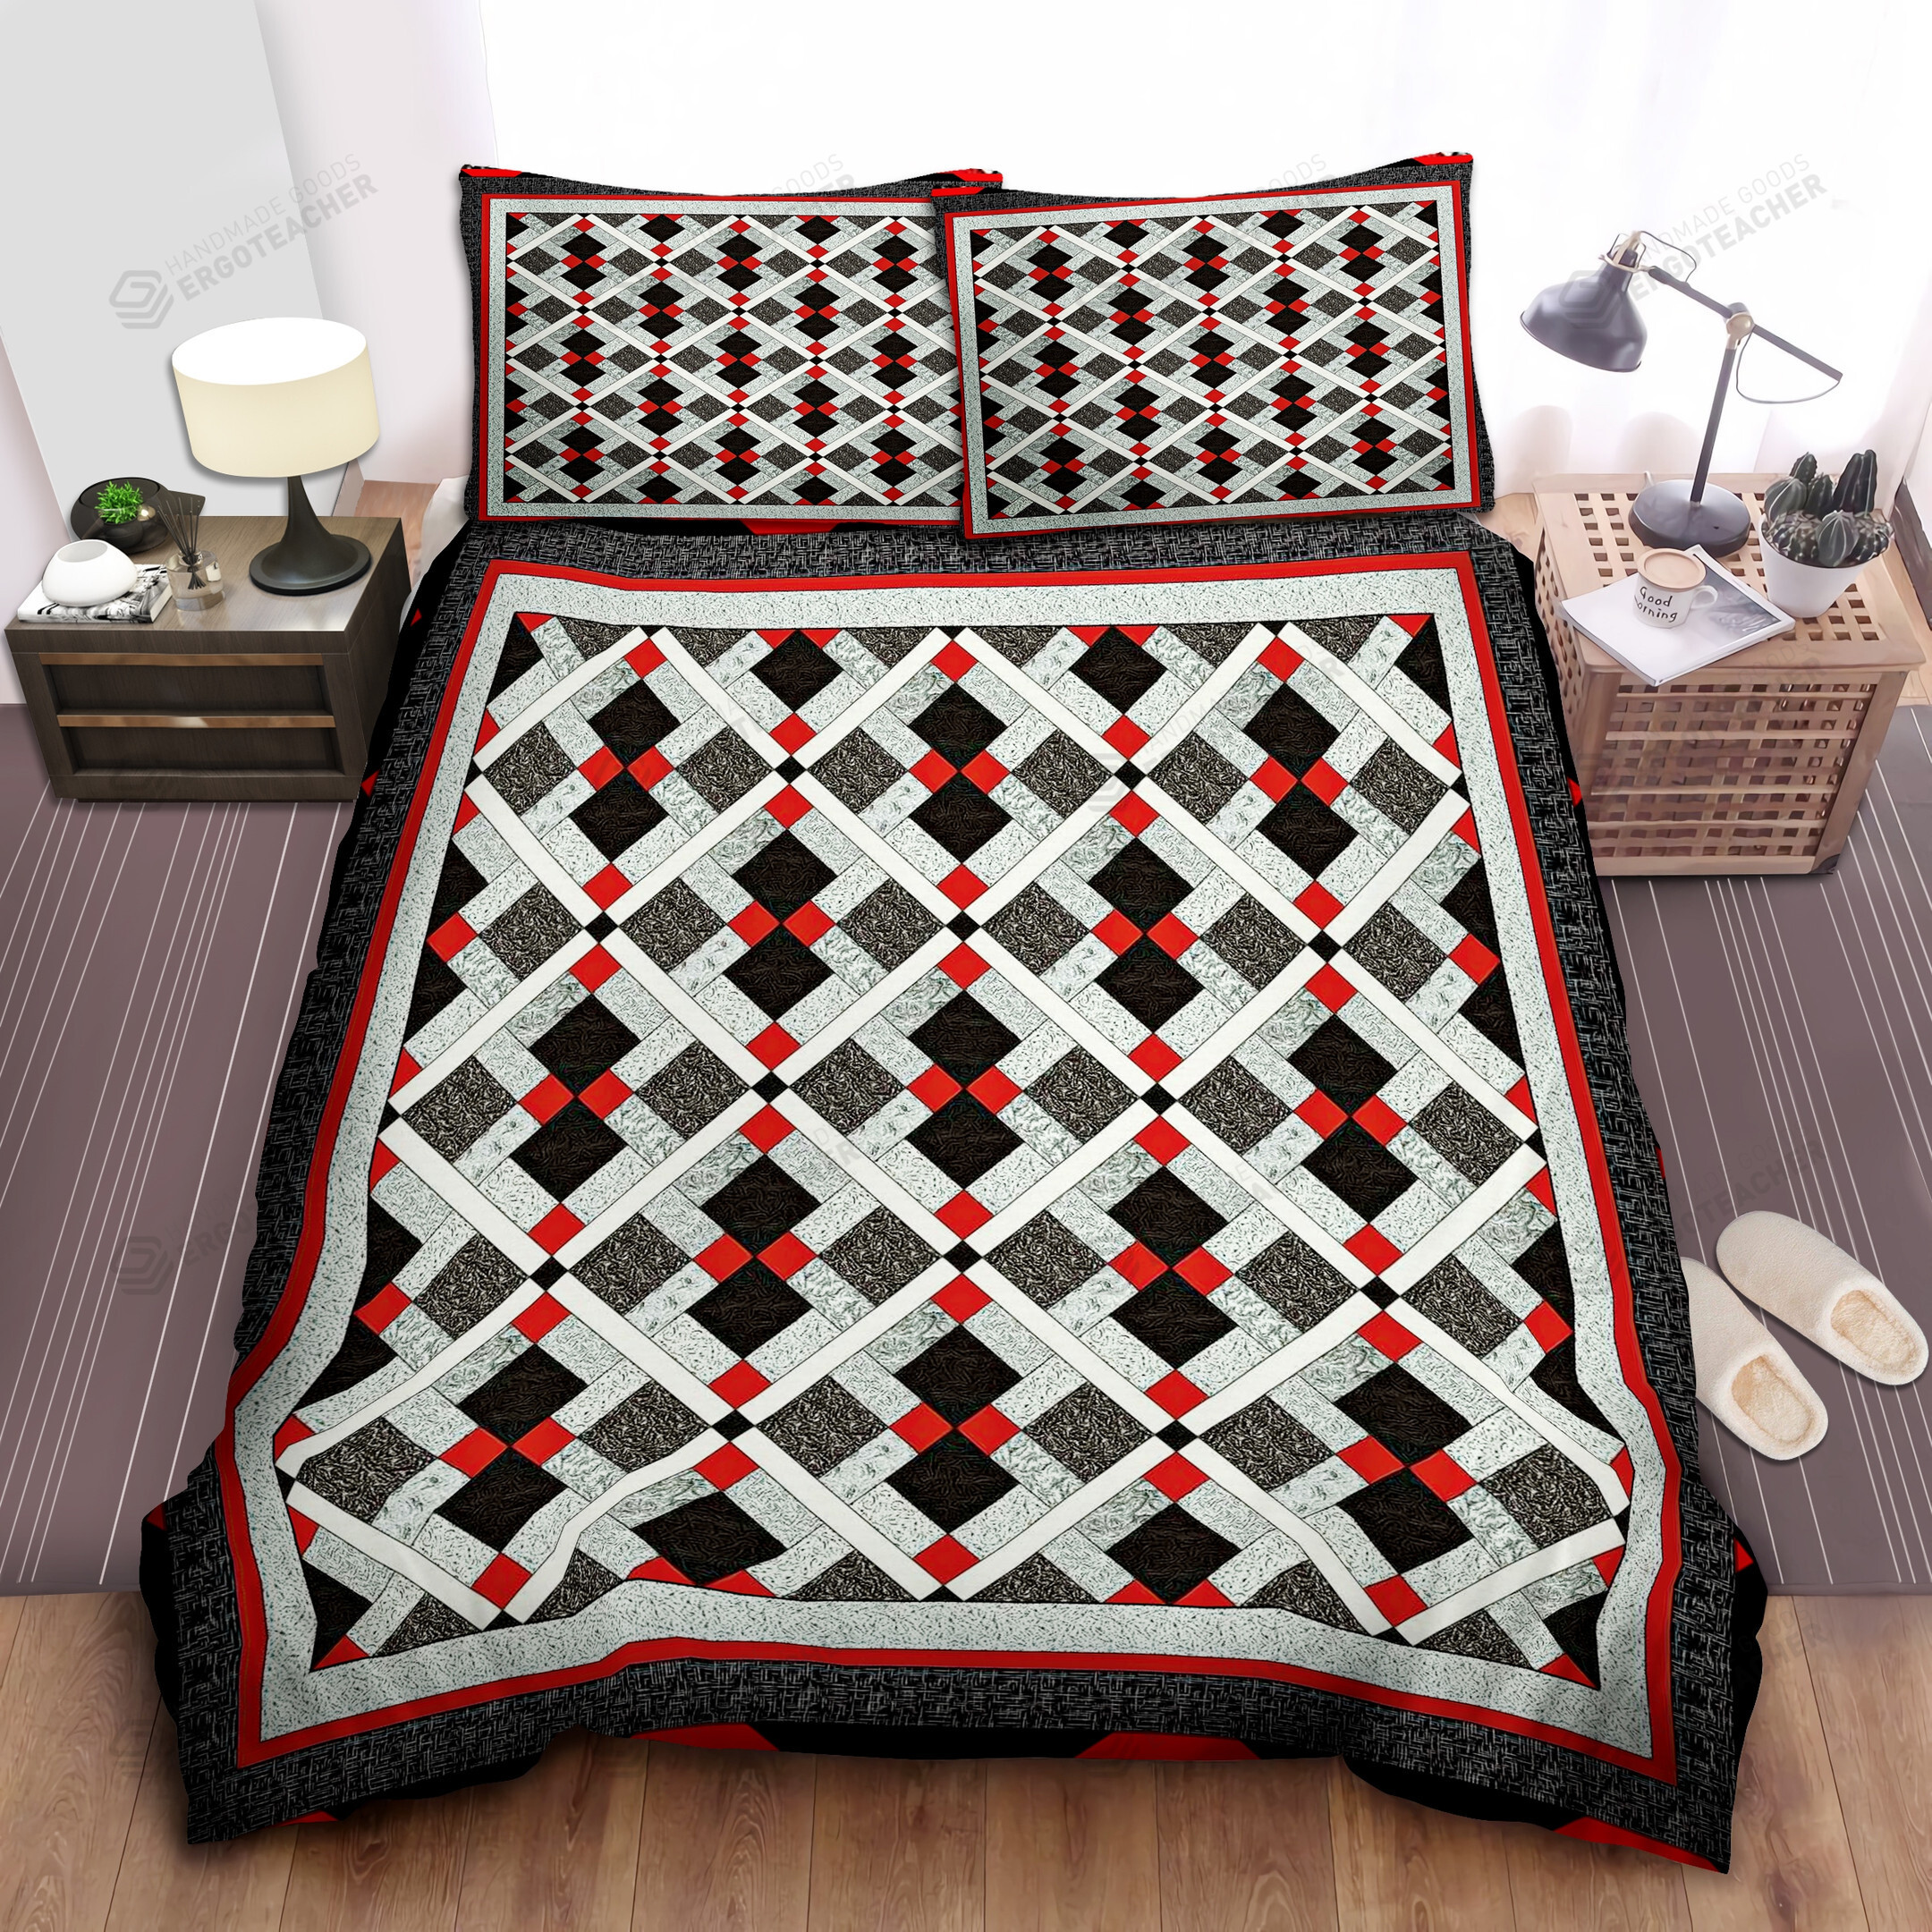 Red Black And White Pattern Diamond Bed Sheets Spread Duvet Cover Bedding Set